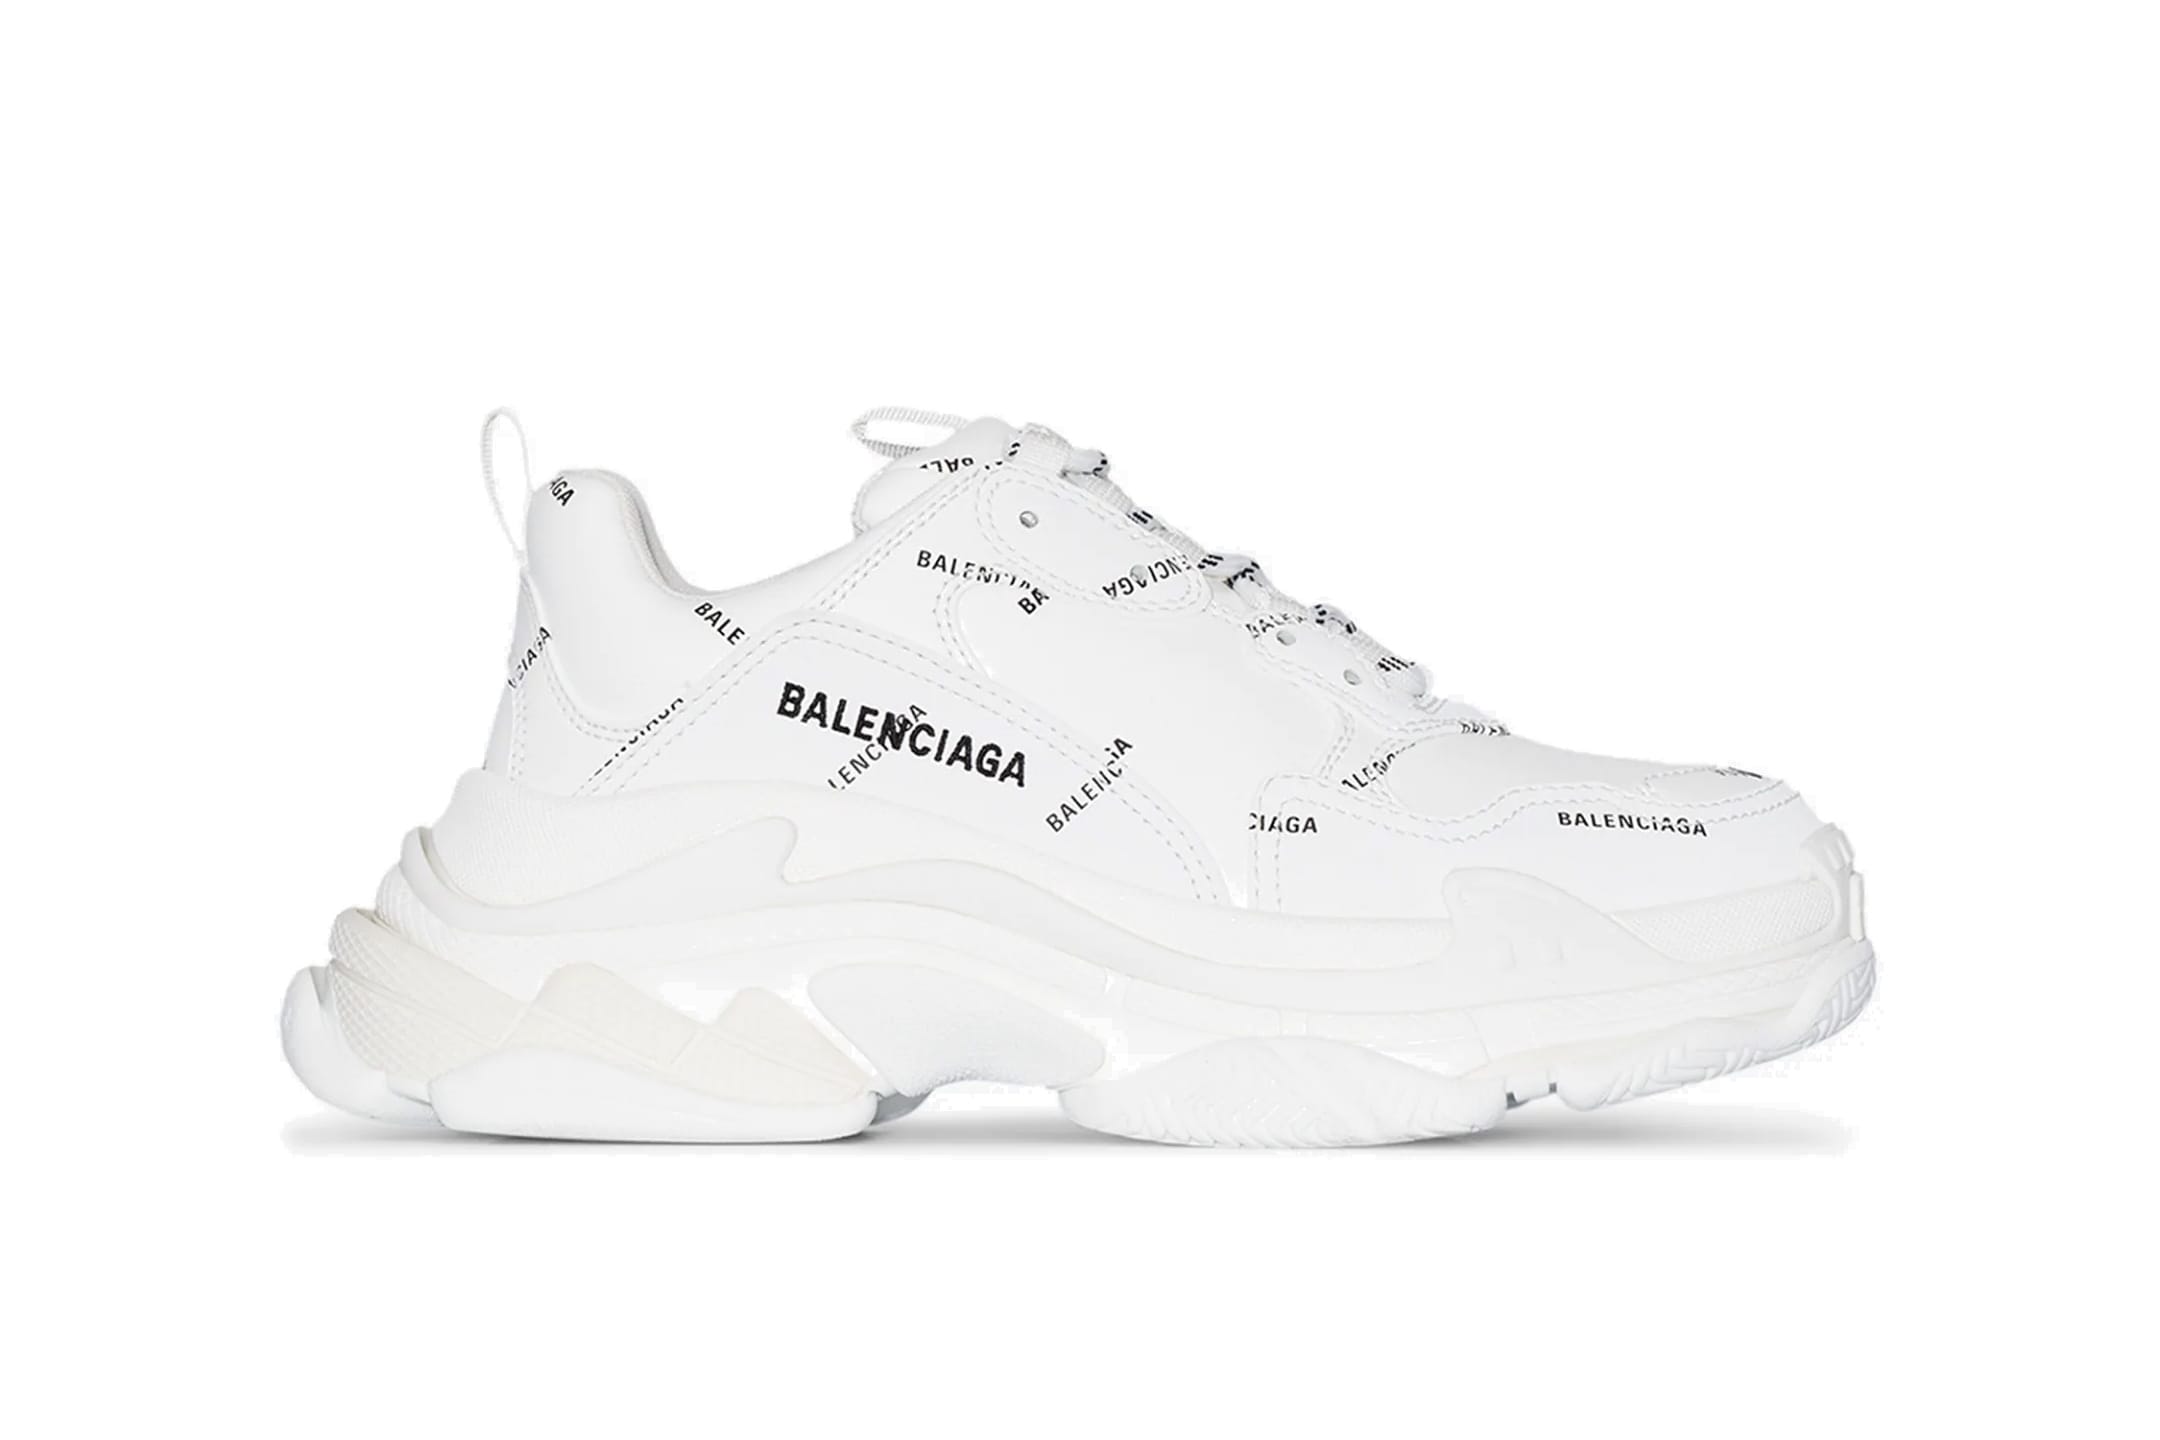 Balenciaga Triple S stone mesh and leather sneakers £650 00